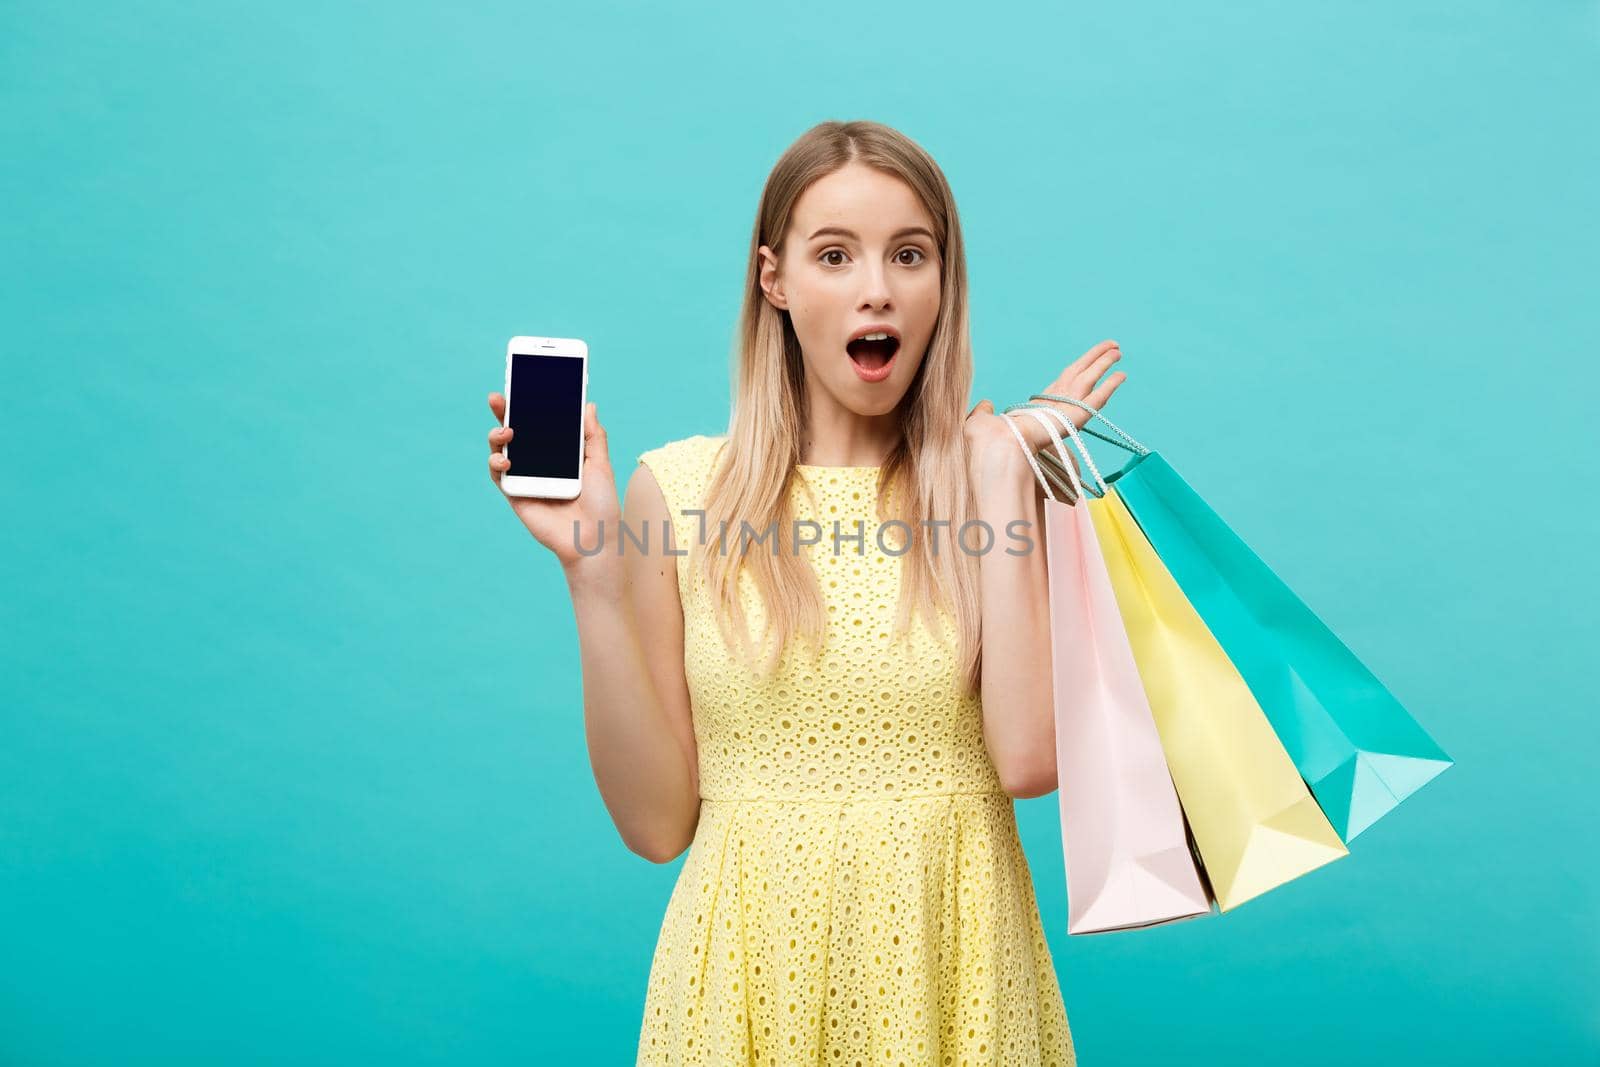 Portrait young attractive woman with shopping bags shows the phone's screen directly to the camera. Isolated on blue background.